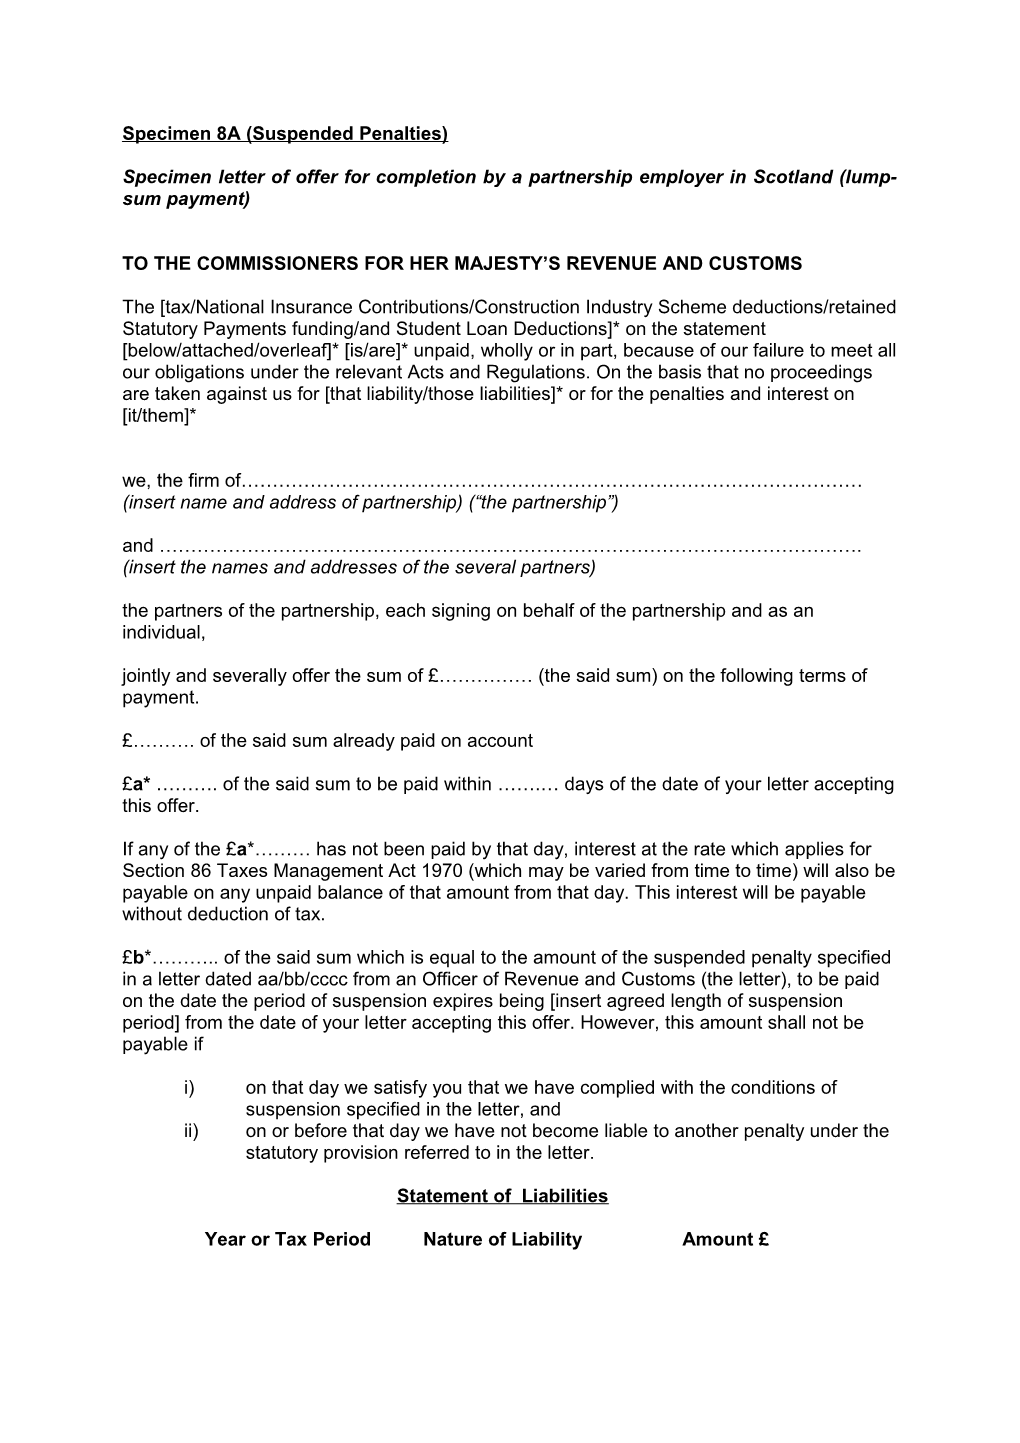 Specimen Letter of Offer for Completion by a Partnership Employer in Scotland (Lump-Sum Payment)